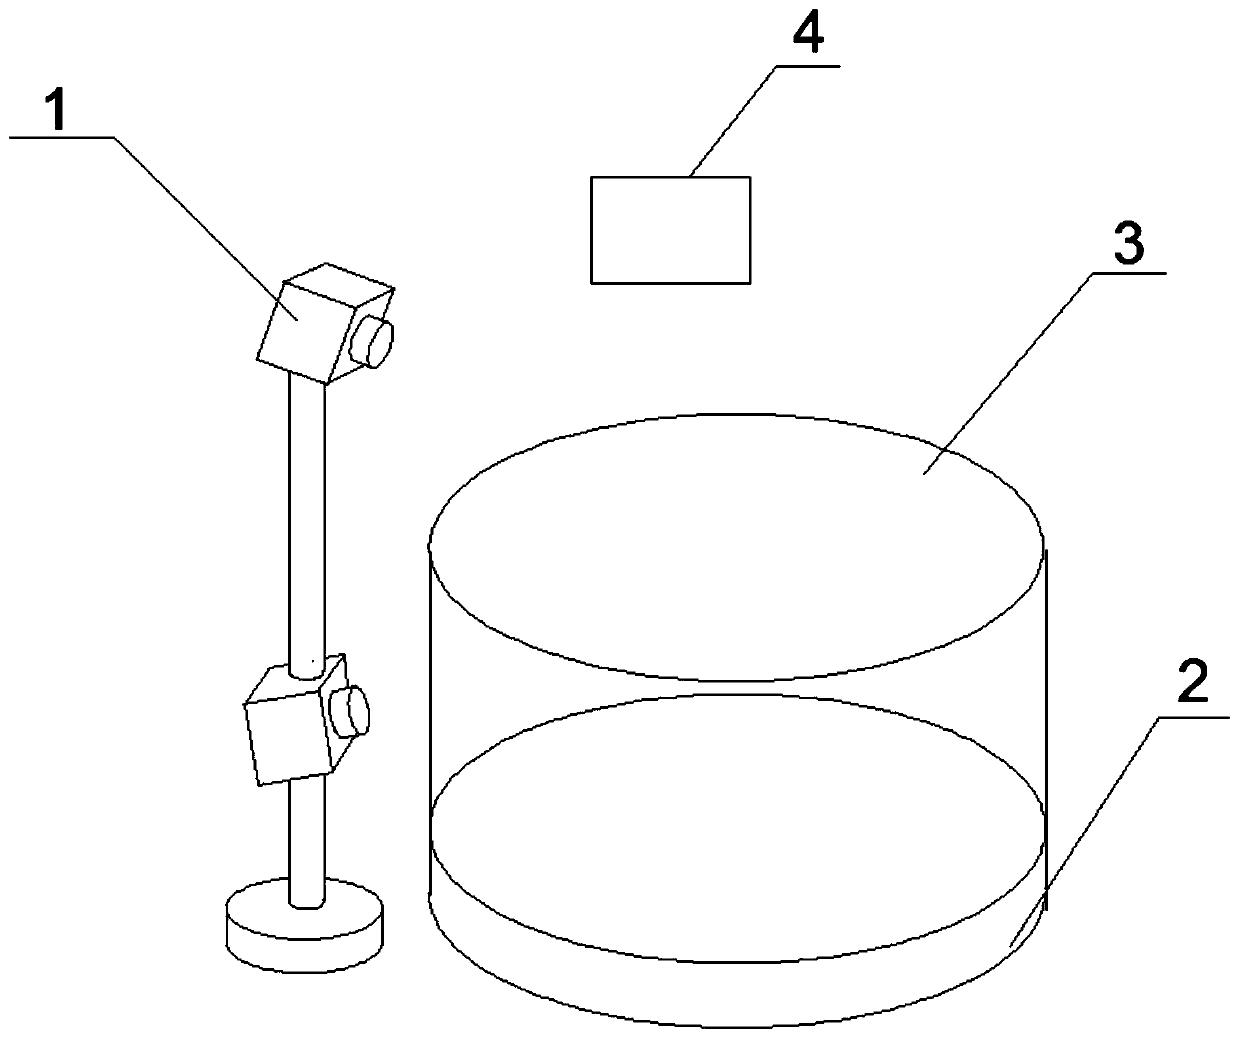 A device for 360° 3D measurement and information acquisition of objects